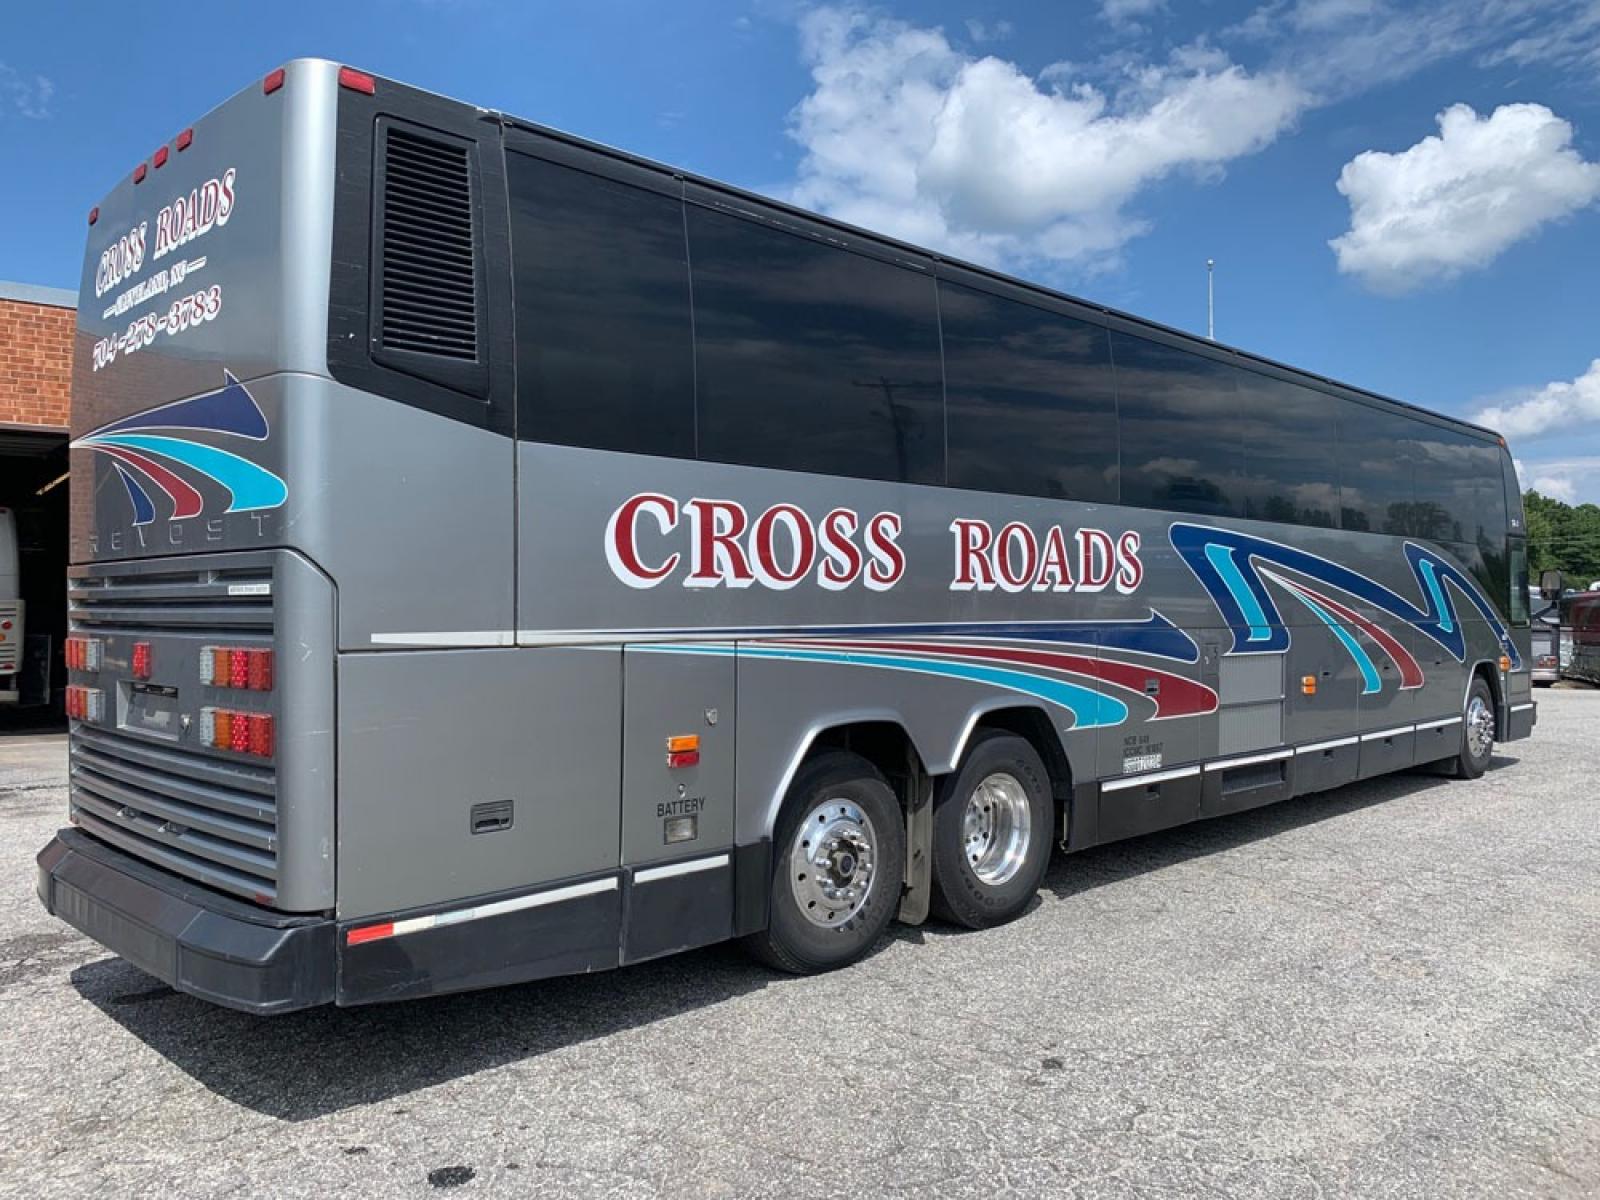 1998 Prevost HS-45 with an Detroit Diesel Series 60 engine, Allison transmission, 0.000000, 0.000000 - 1998 Prevost H3-45 - Series 60 Detroit Diesel - Allison Automatic Transmission - 45' - 56 Passengers -Enclosed Parcel Racks - 5 Flat Screens and DVD - Photo #2